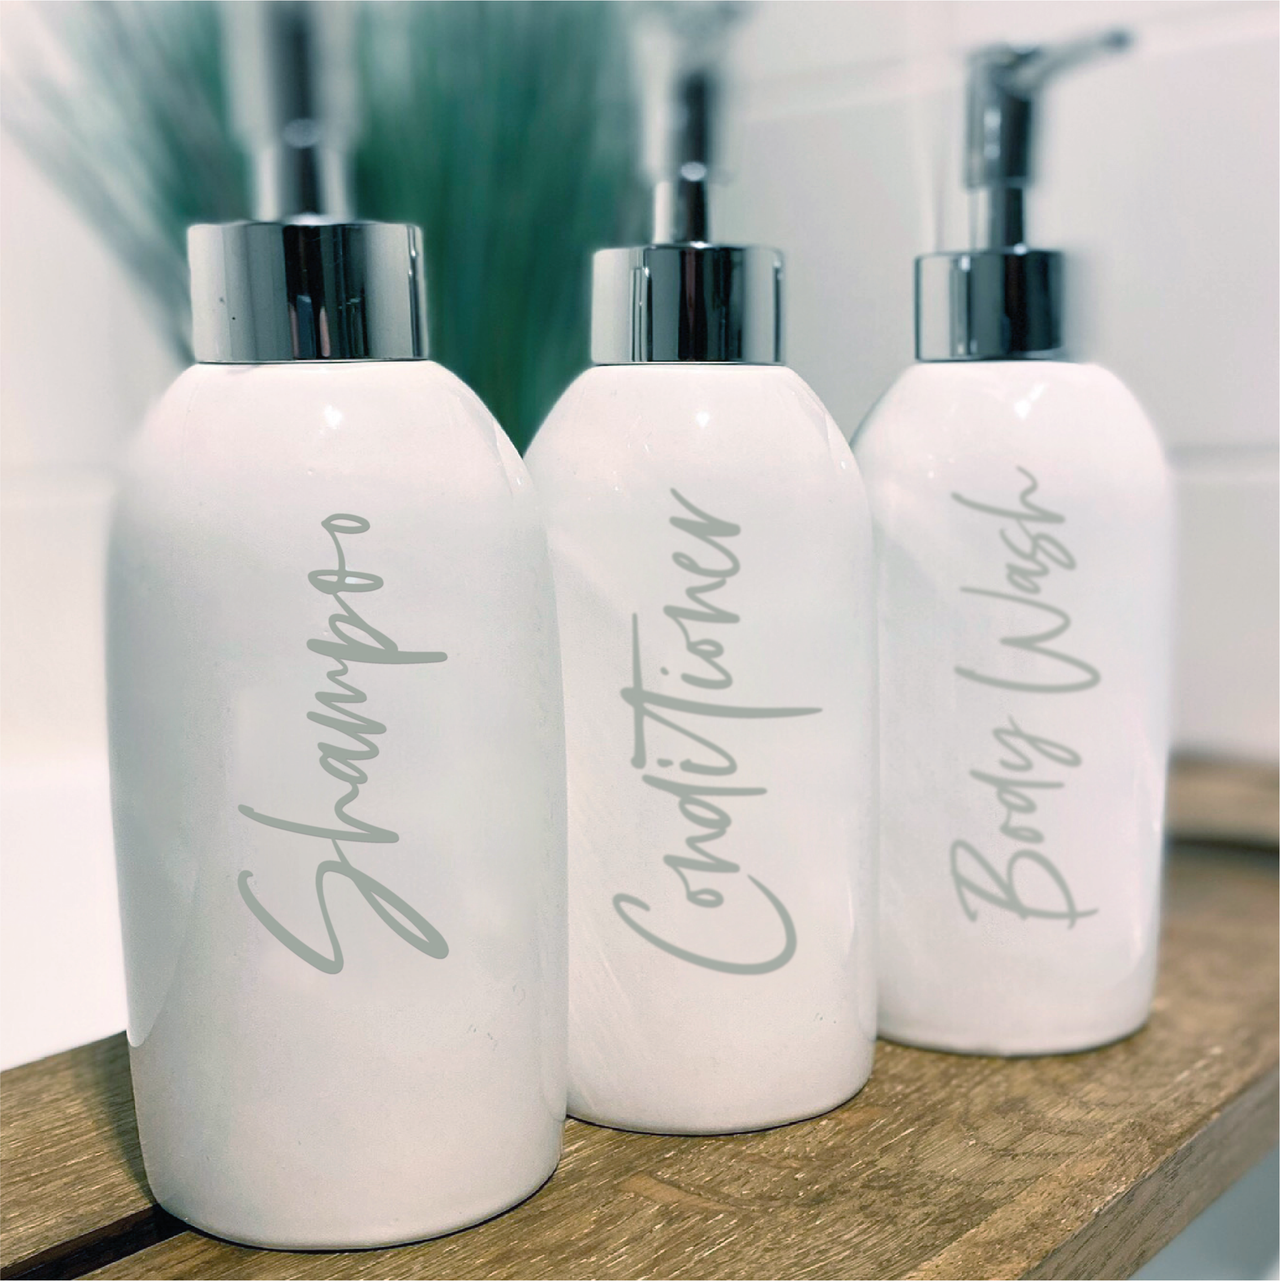 Three white pump bottles with Shampoo, Conditioner and Body Wash decals applied to them